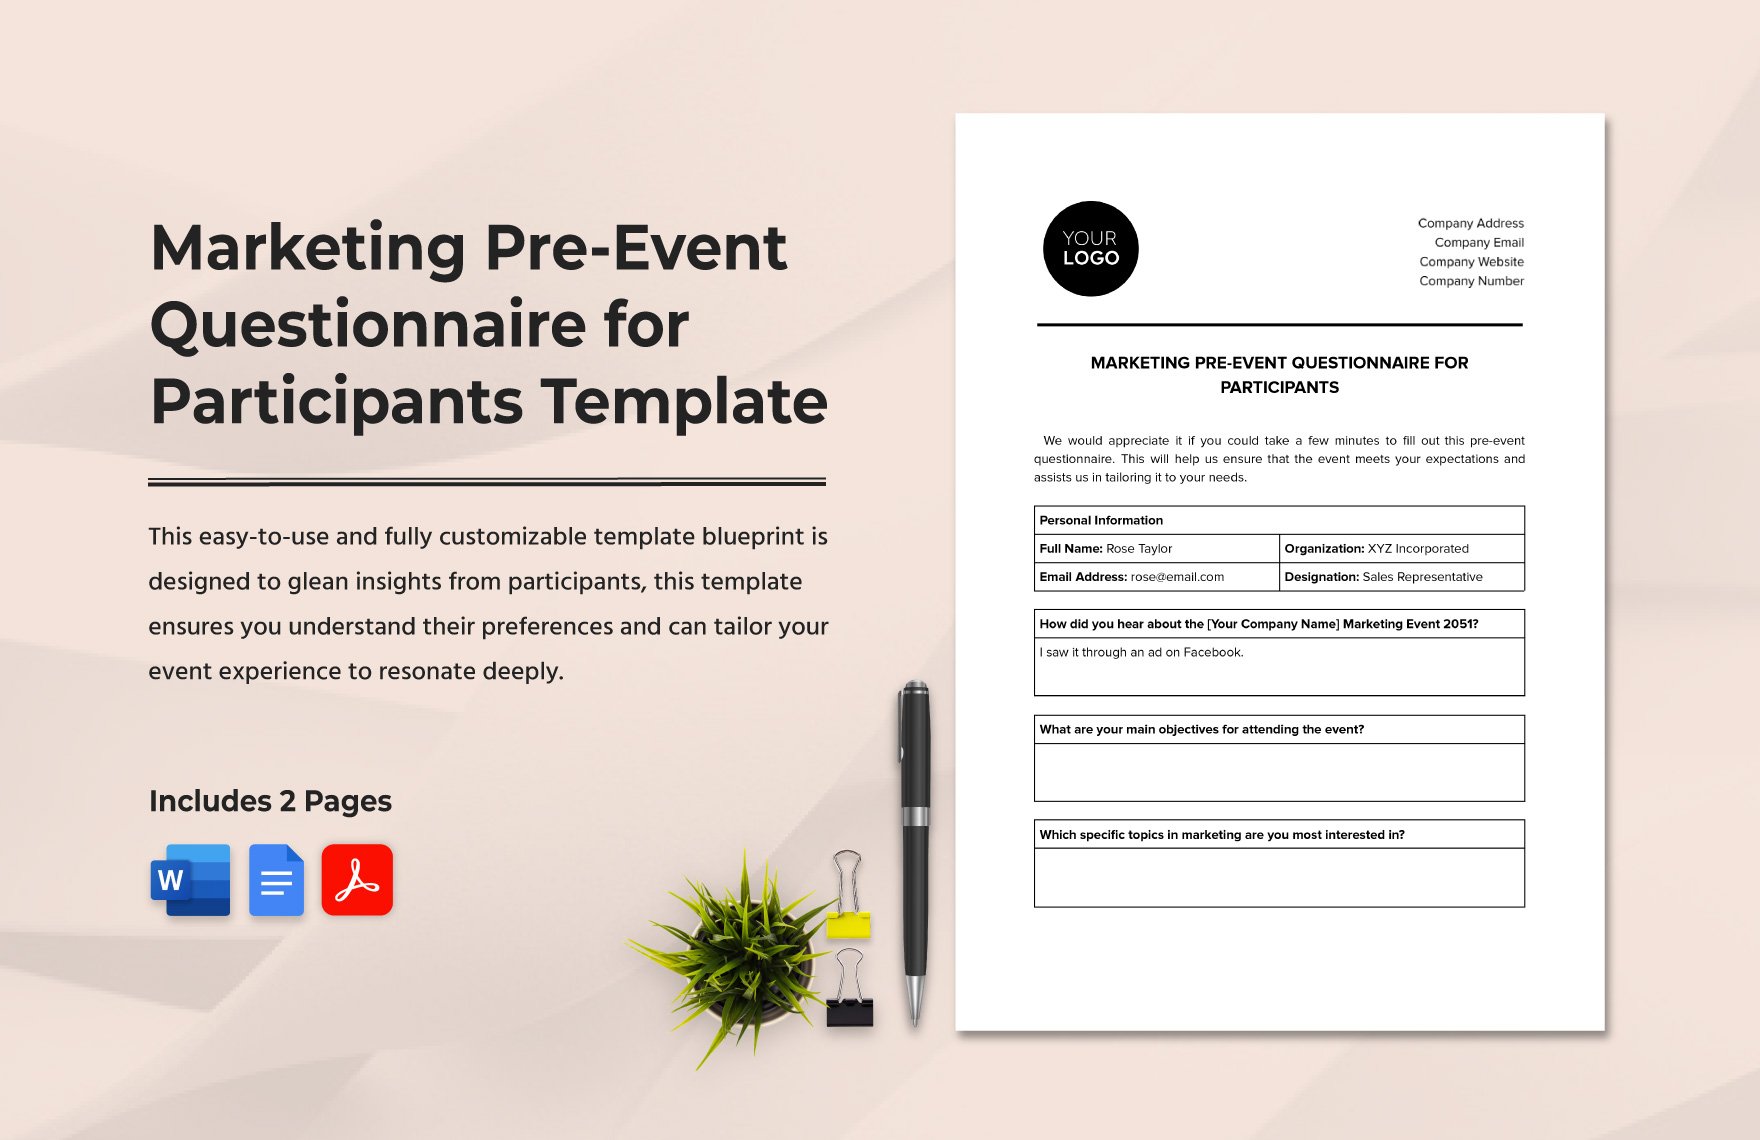 Marketing Pre-Event Questionnaire for Participants Template in Word, Google Docs, PDF